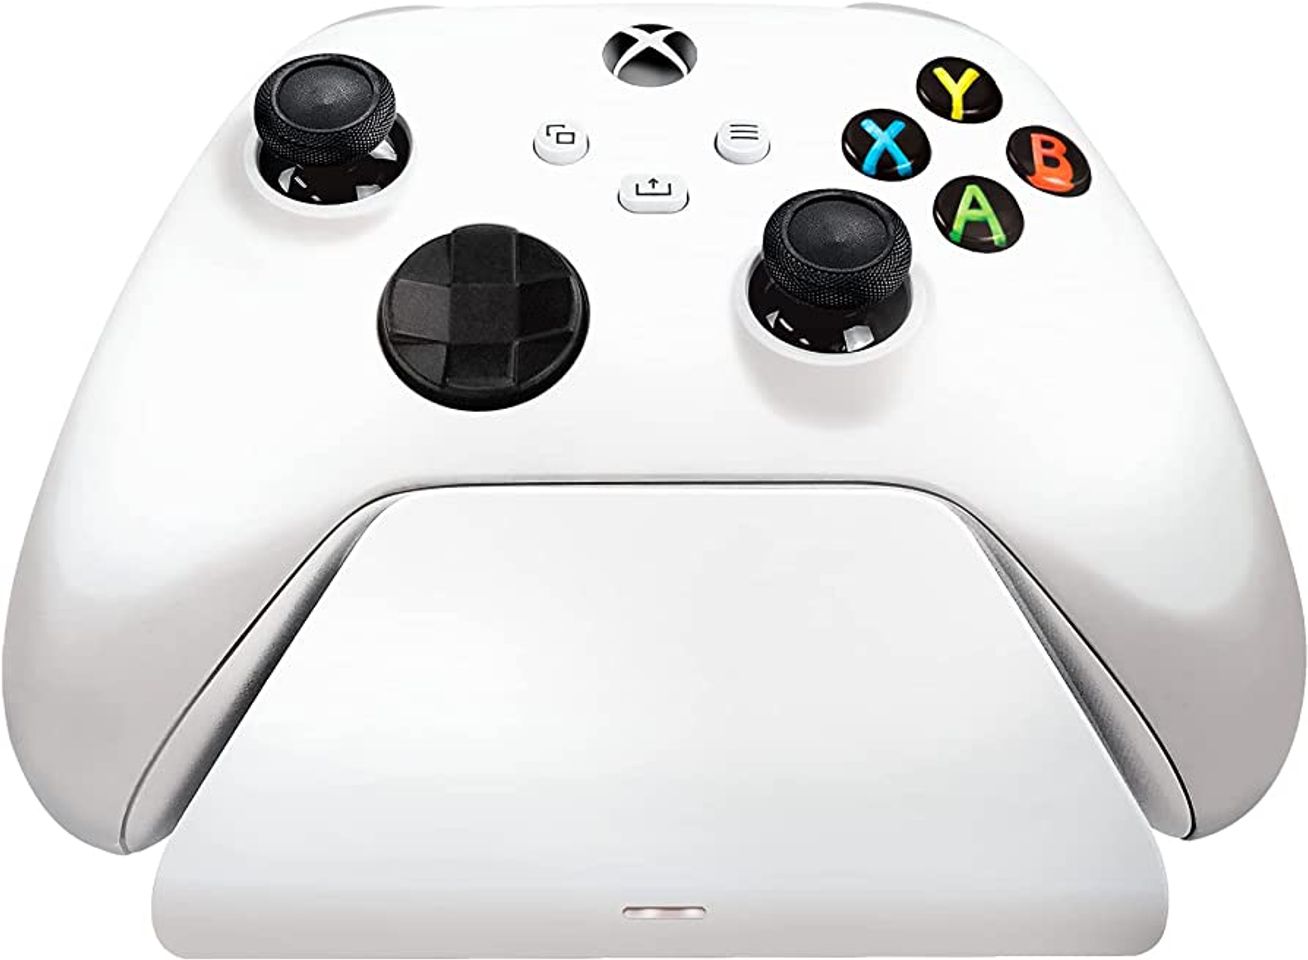 AmazonBasics Xbox One Wired Controller Review